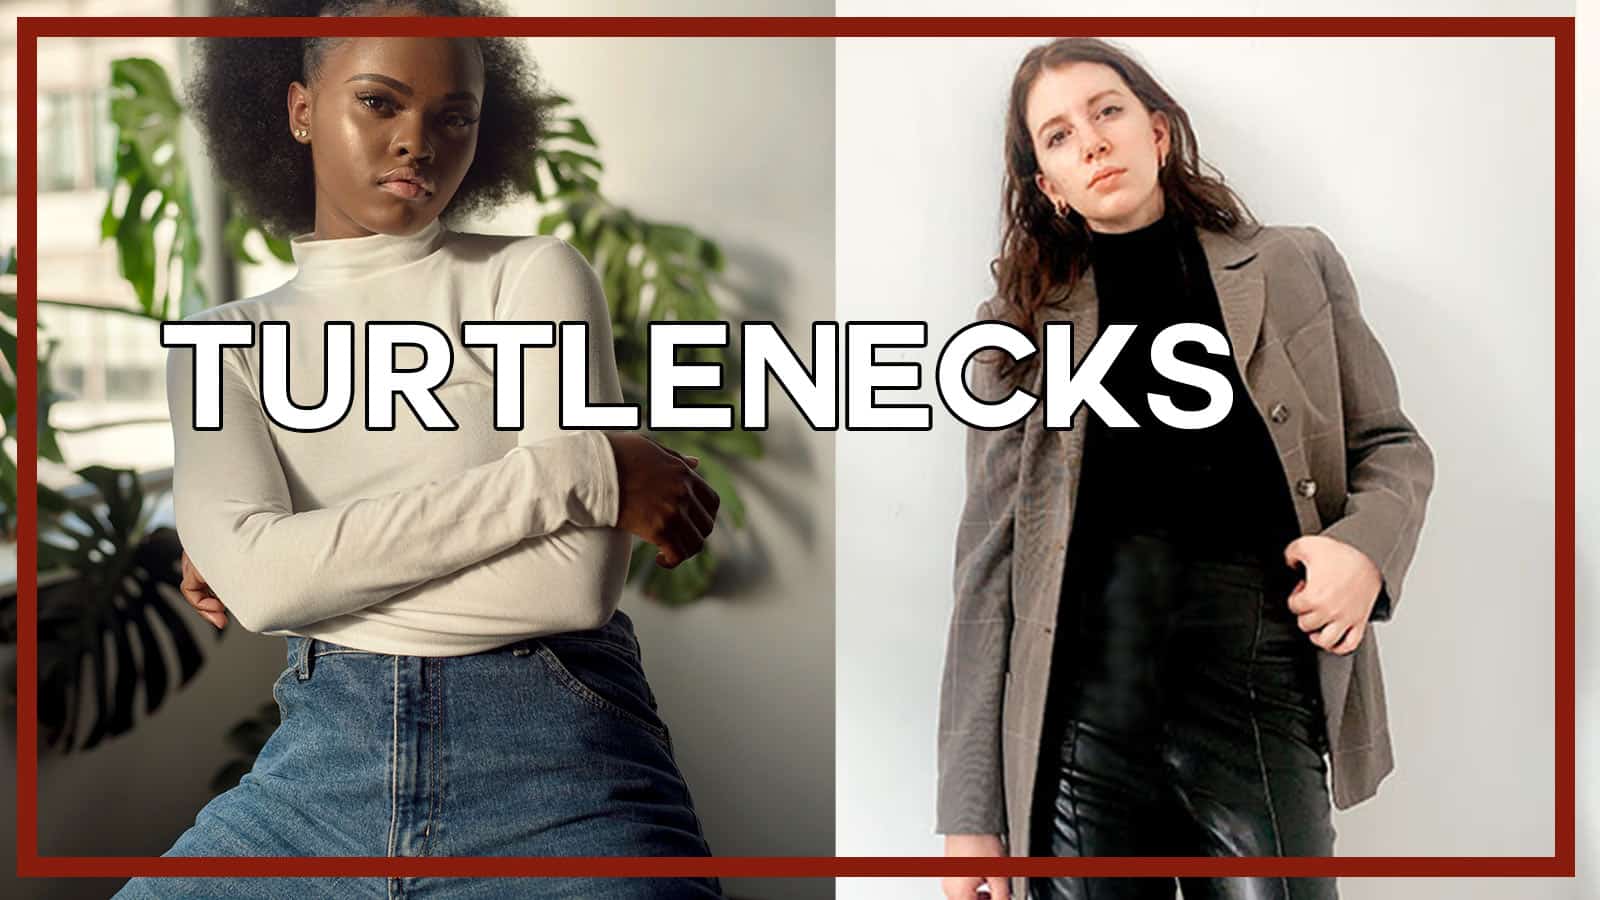 If you don’t have a turtleneck in your wardobe, here’s why you need one this season